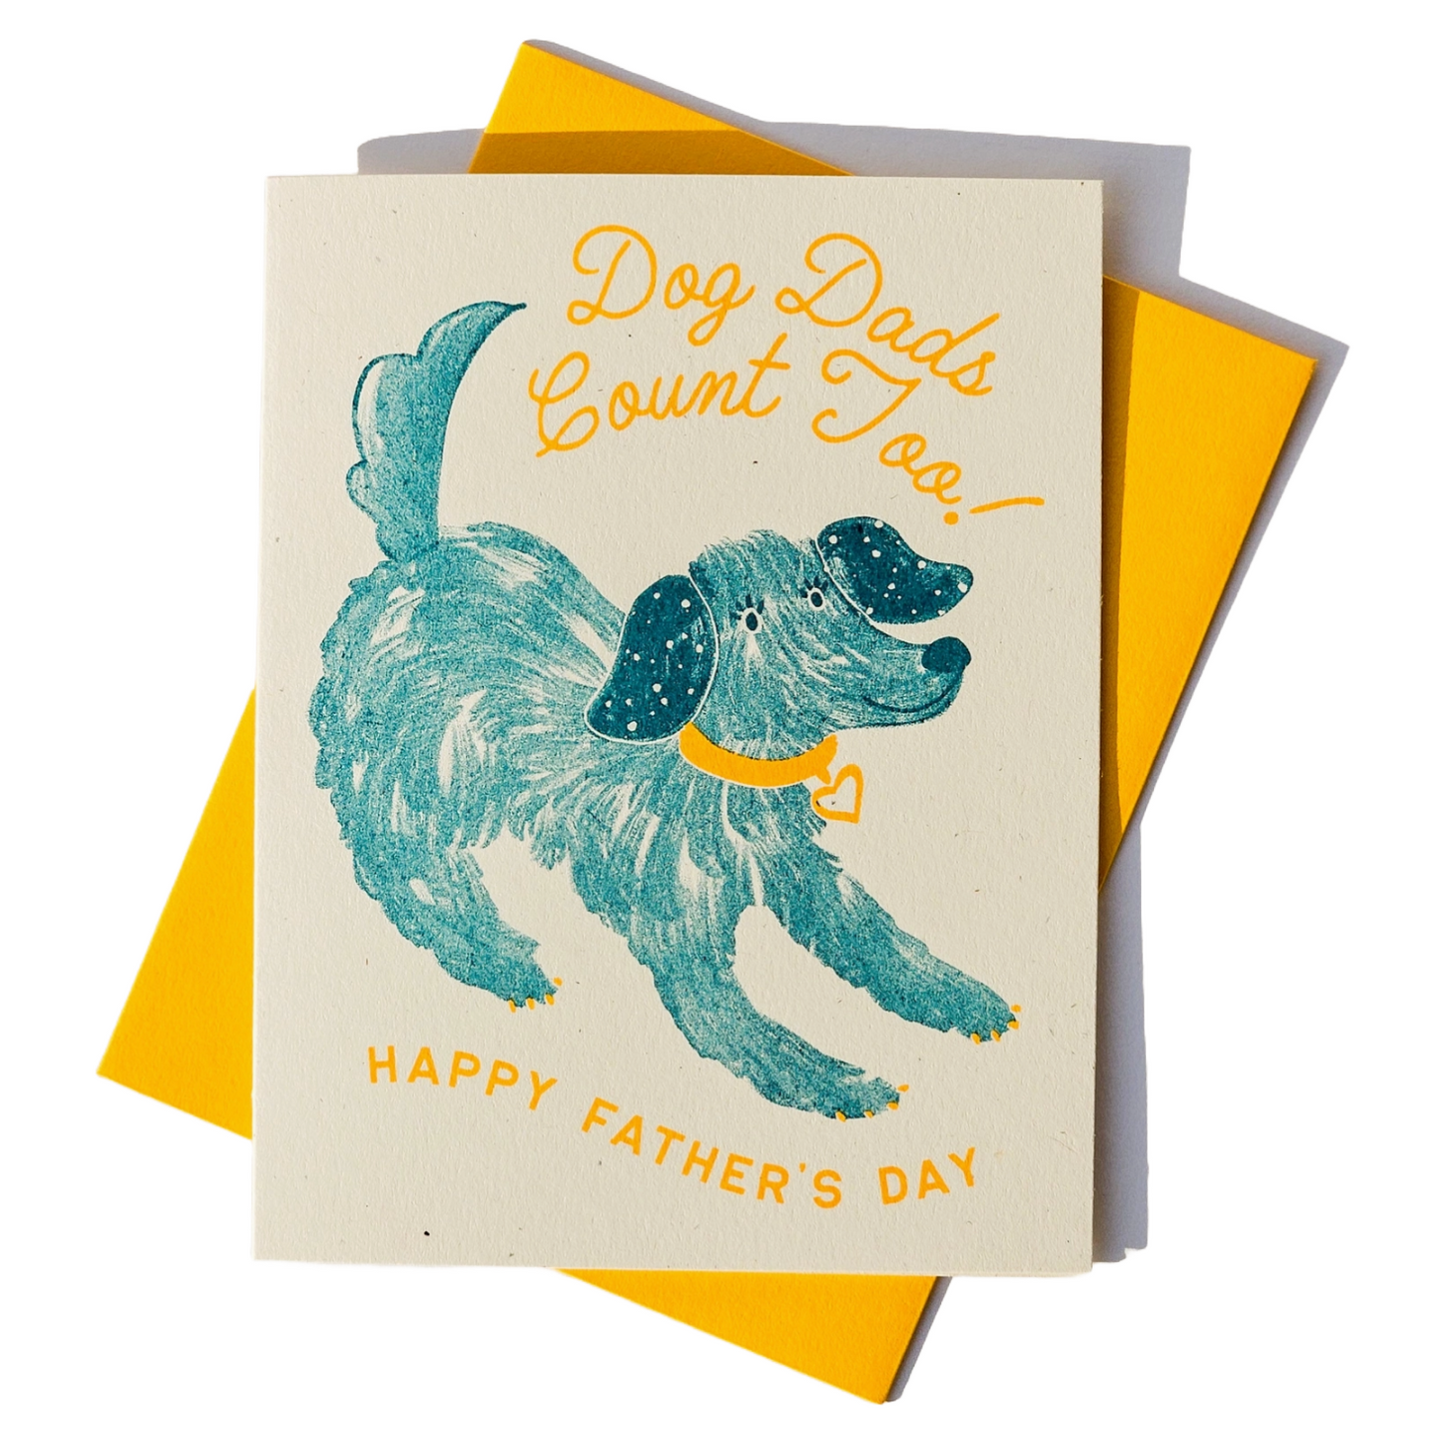 Dog Dads Count Card